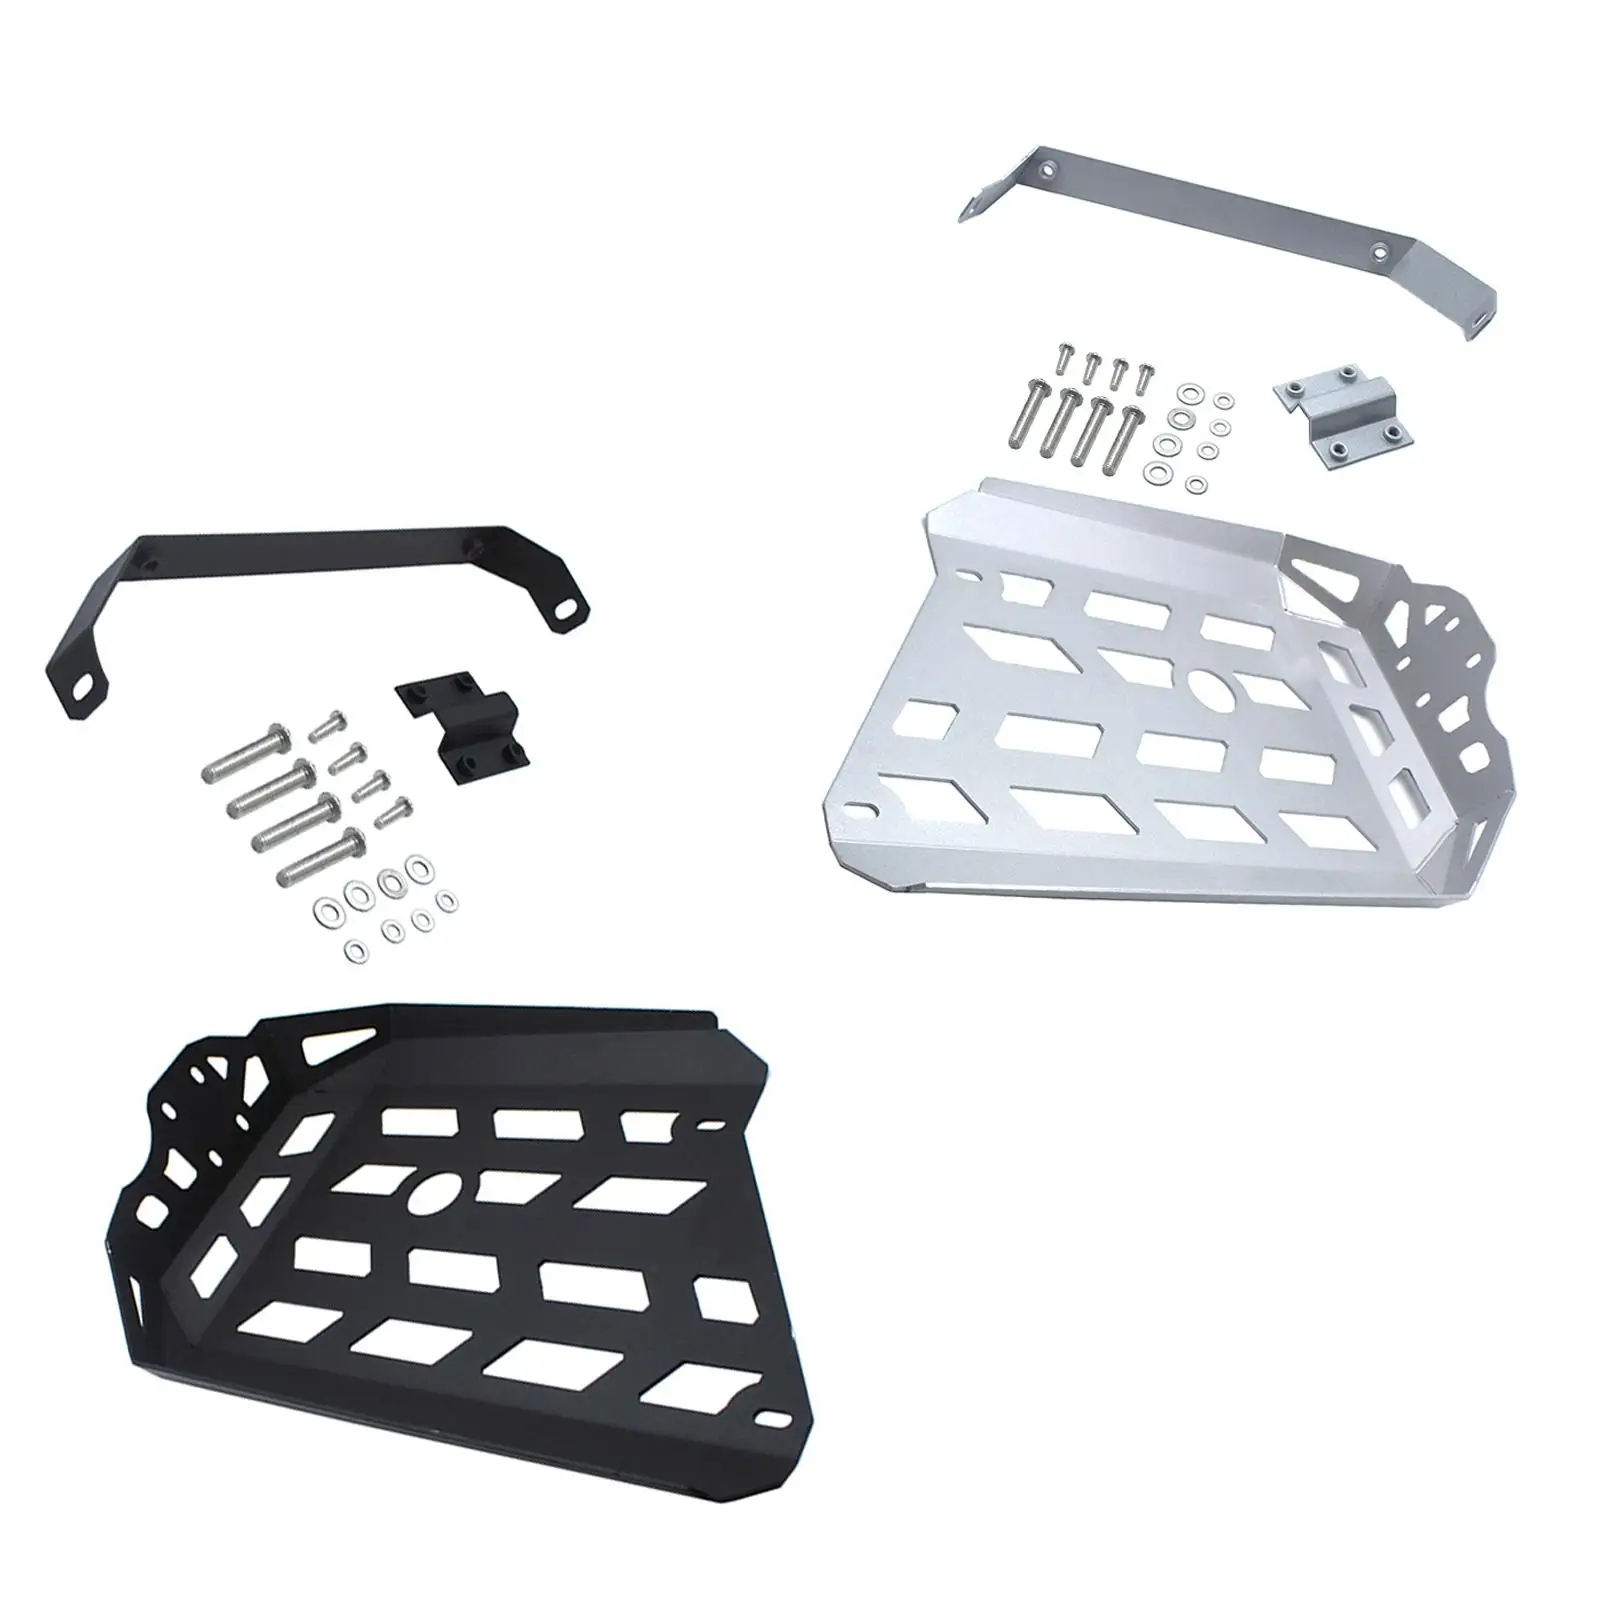 Engine Chassis Guard Cover Protector Skid Board Replacement Belly Pan Protector for for Suzuki V Strom DL1050 XT 2020-2022